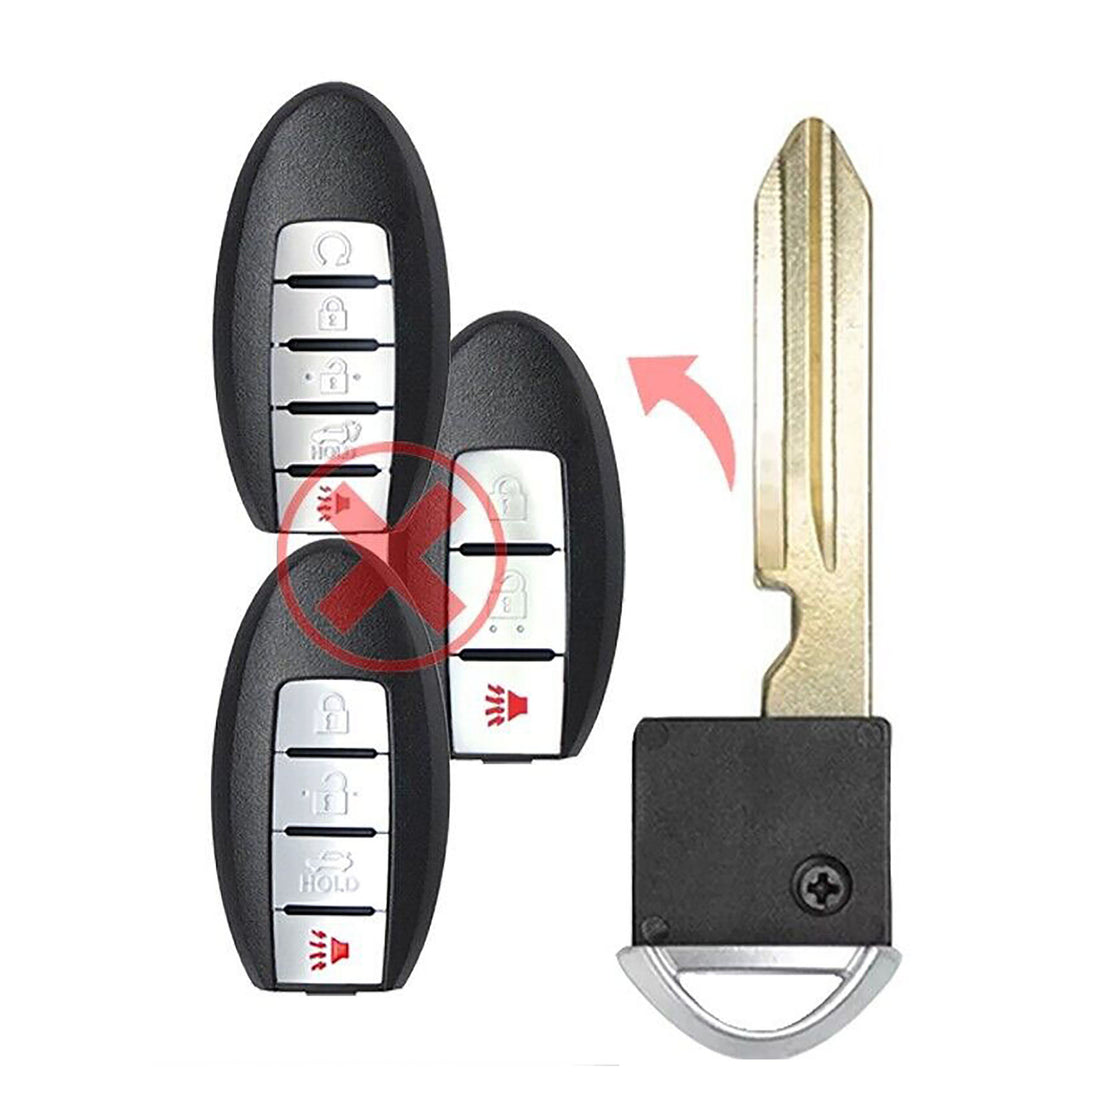 1x New Replacement Prox Key Fob Uncut Insert Blade Compatible with & Fit For Nissan Infiniti - MPN KR5TXN7-Blade-03